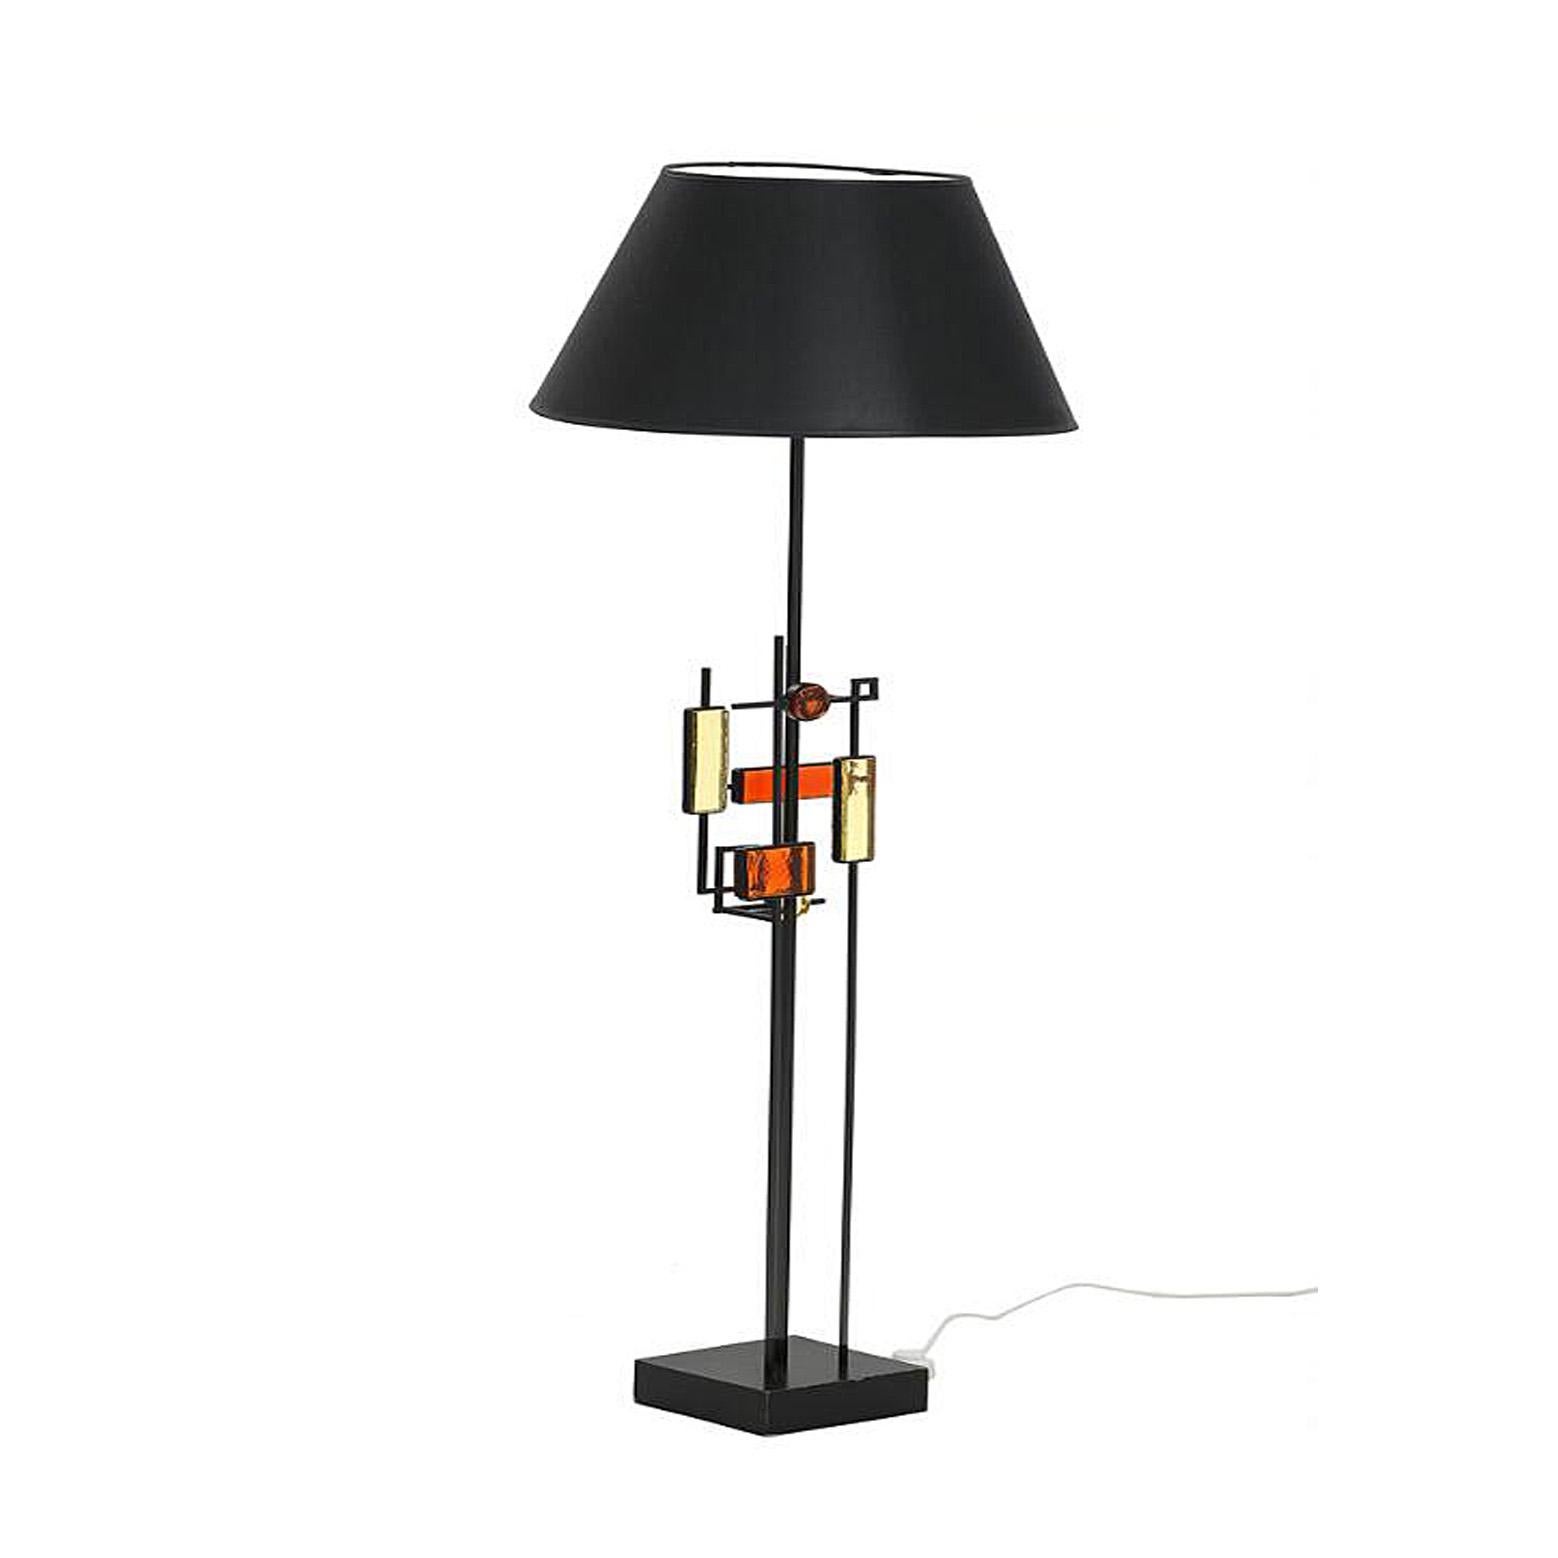 Mid-20th Century Floor Lamp By Svend Aage Holm Sørensen 1960's For Sale